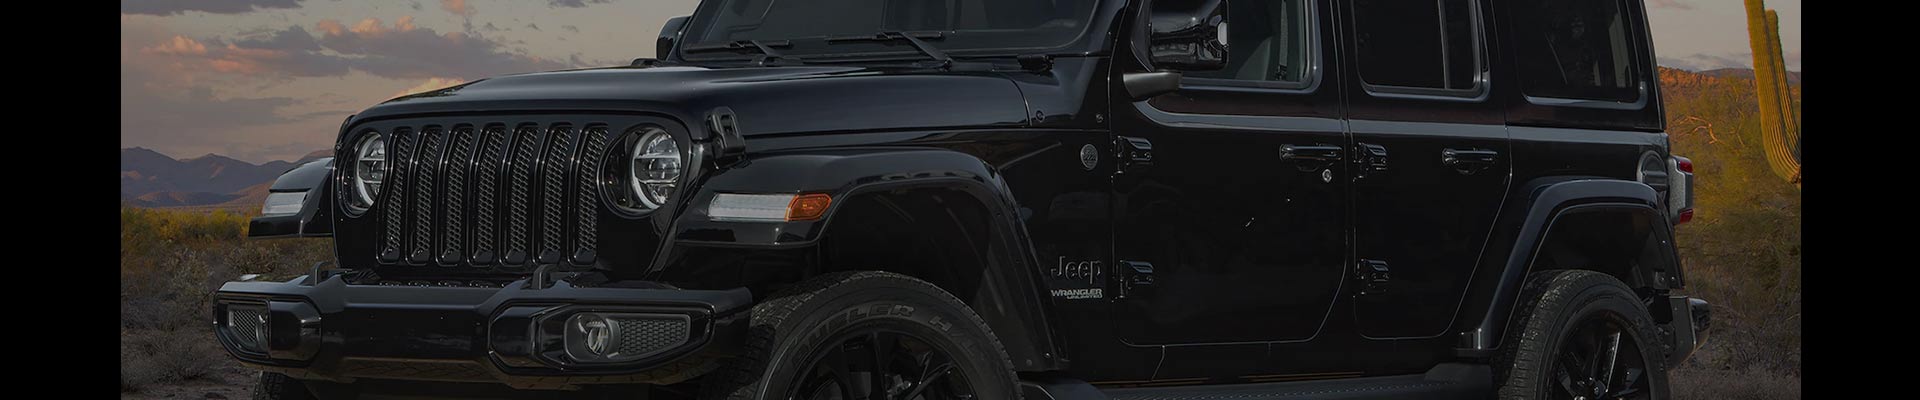 Shop Replacement and OEM 2006 Jeep Wrangler Parts with Discounted Price on the Net